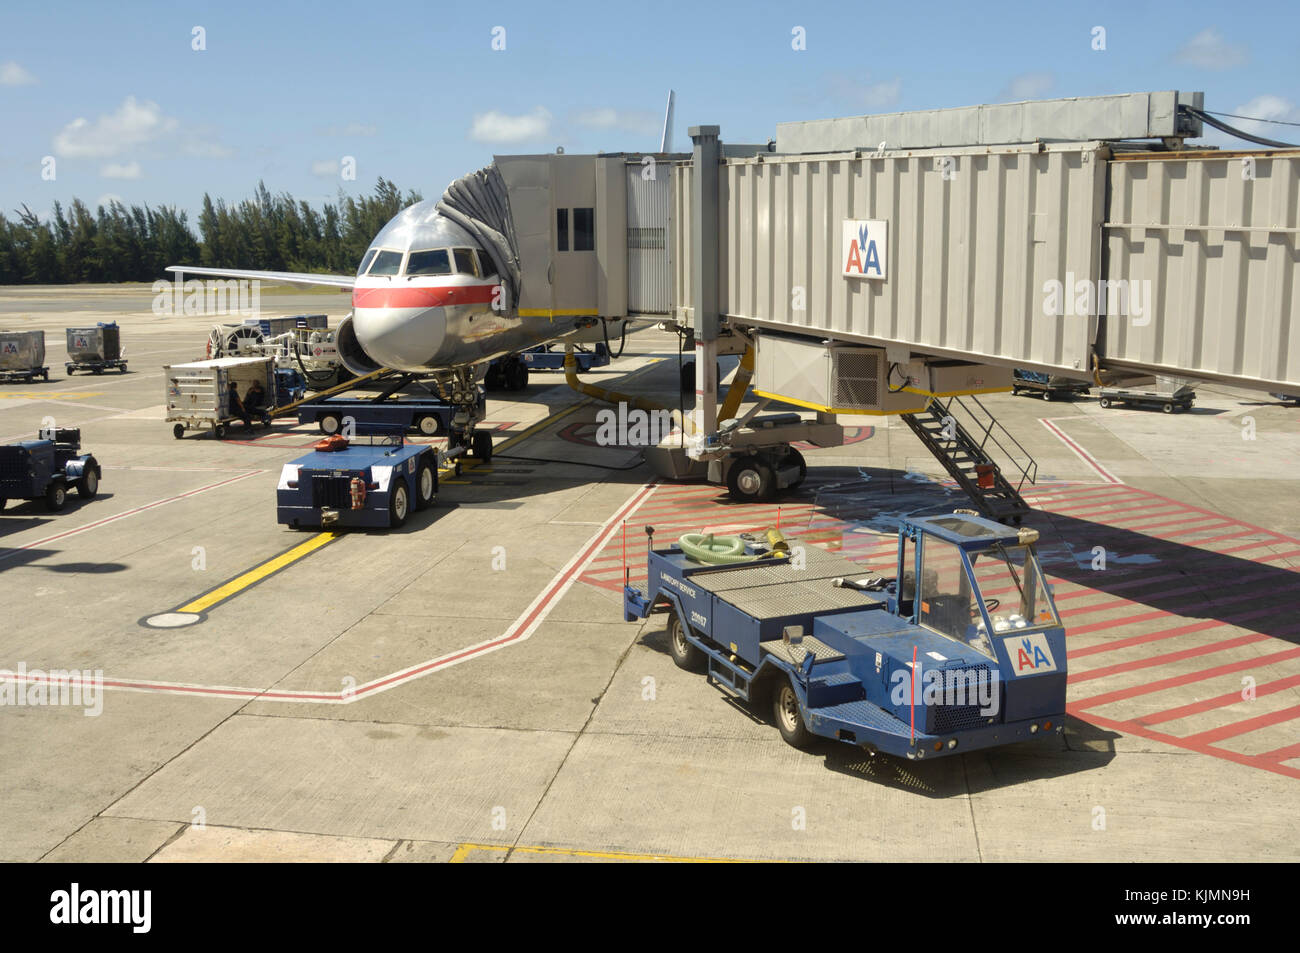 American Airlines Boeing 757-200 parked with tug, baggage-belt truck, trolleys and jetway attached Stock Photo